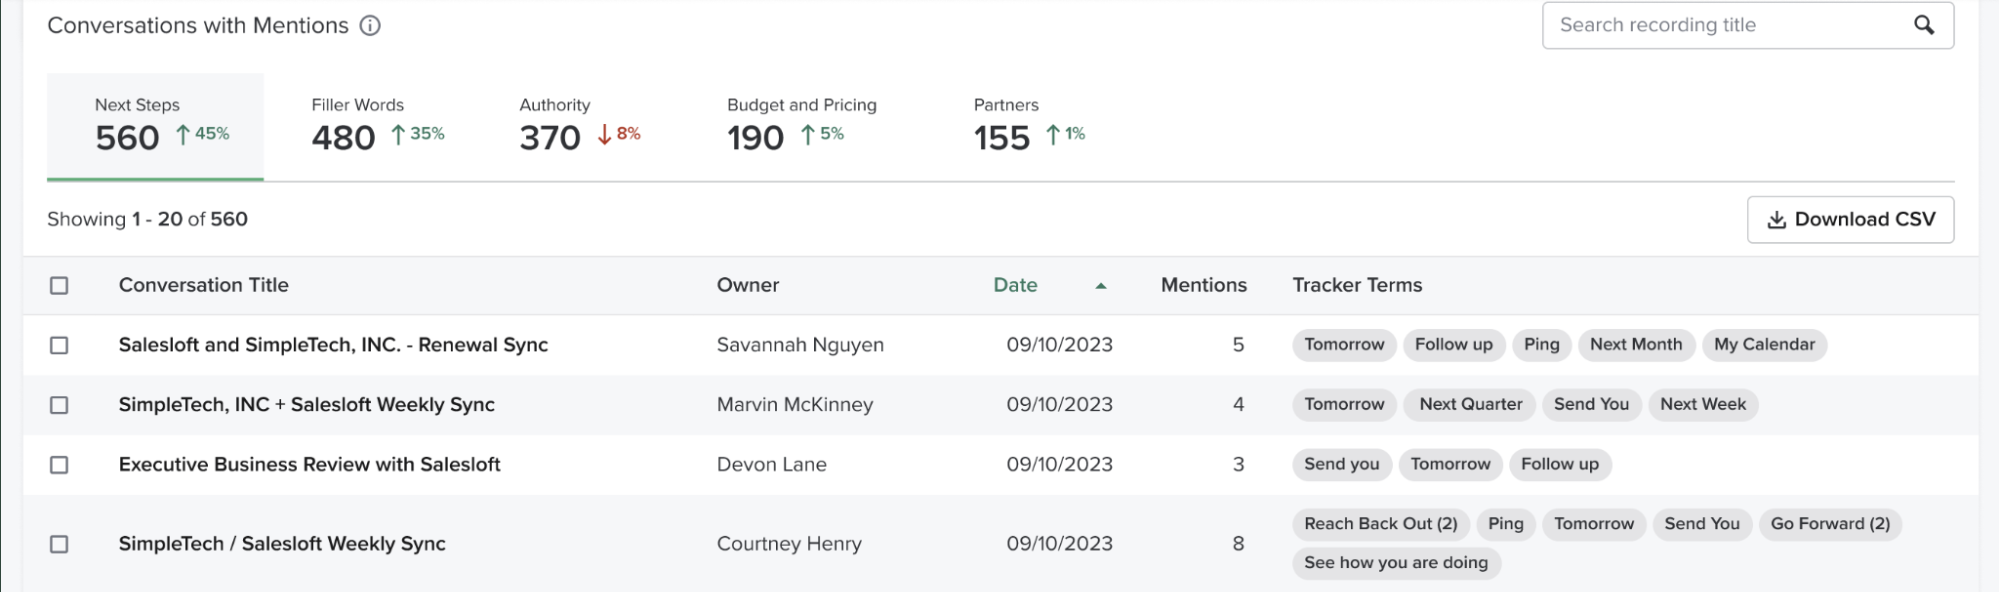 Screenshot of Conversations with mentions in the Salesloft platform